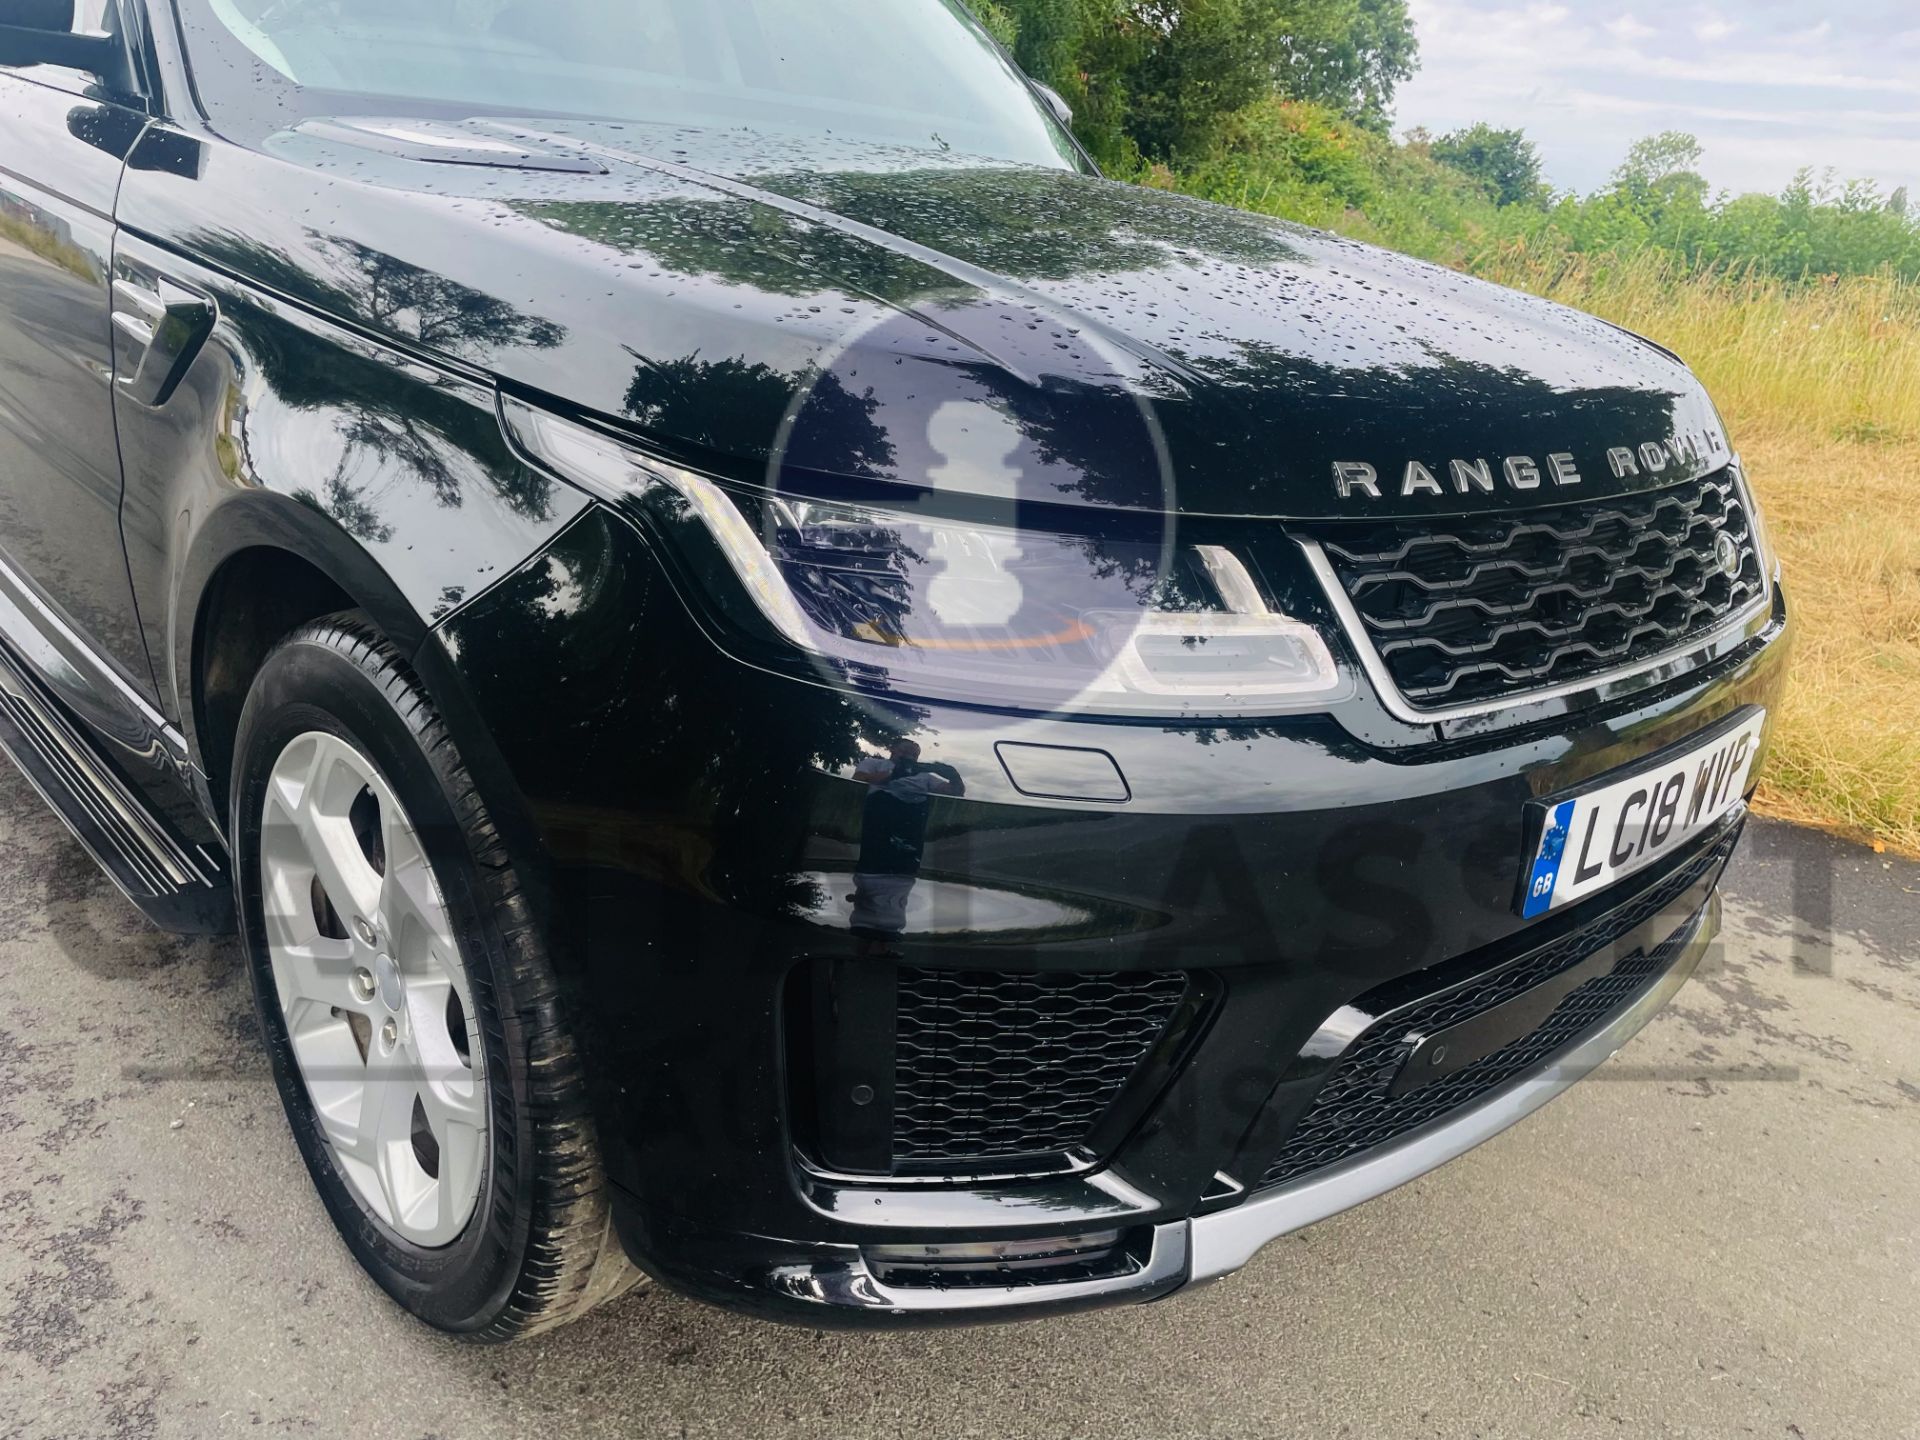 RANGE ROVER SPORT *HSE EDITION* SUV (2018 - NEW MODEL) EURO 6 DIESEL - 8 SPEED AUTOMATIC *HUGE SPEC* - Image 16 of 60